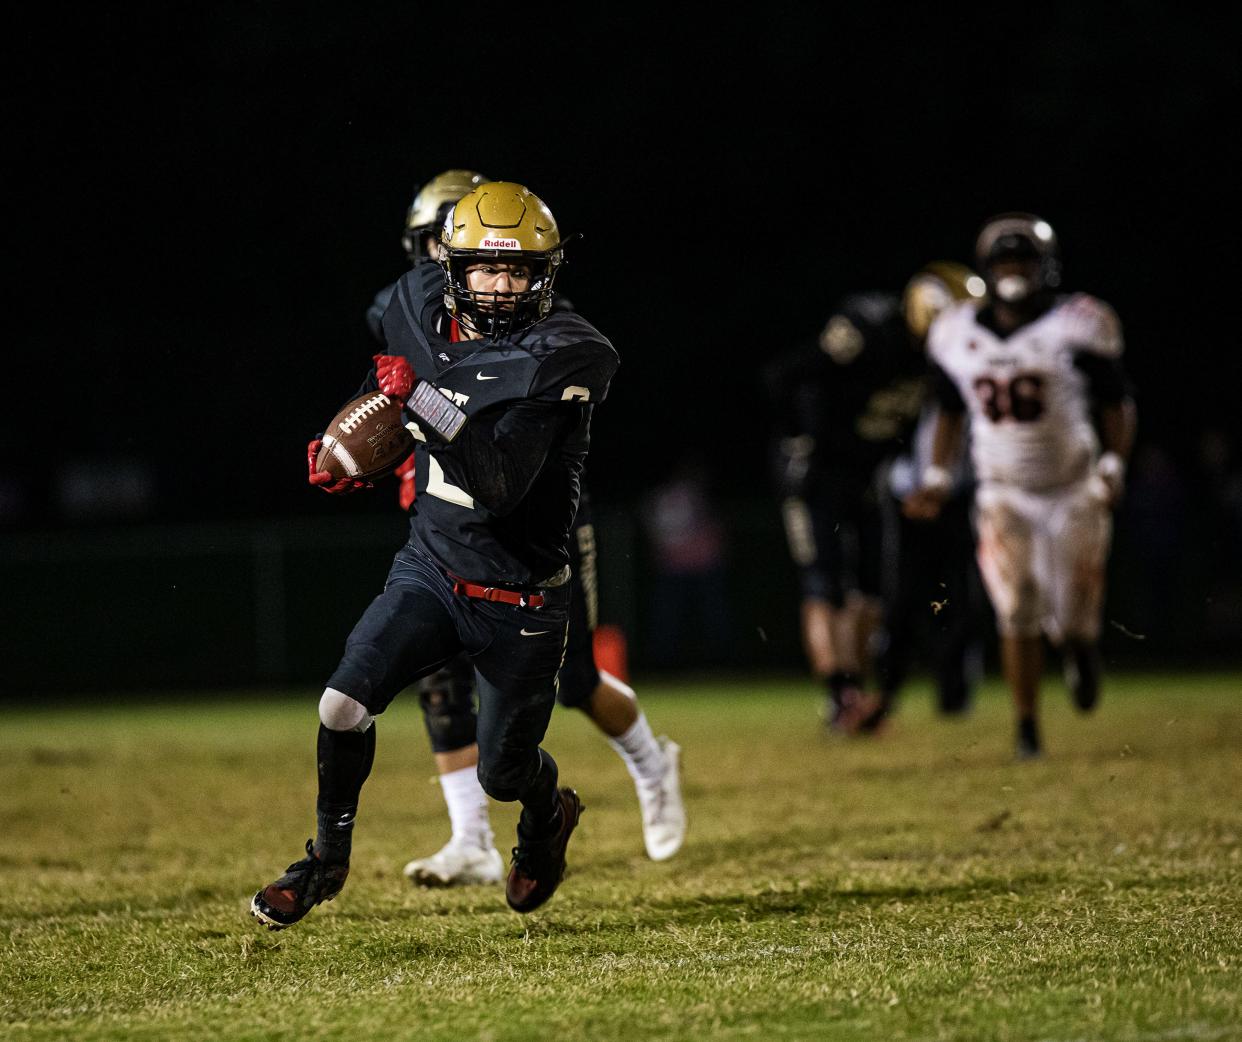 Bullitt East wide receiver Camron Brogan (2) turned upfield against the Fern Creek defense on Friday night. The Chargers defeated the visiting Tigers, 20-6. Oct. 8, 2021